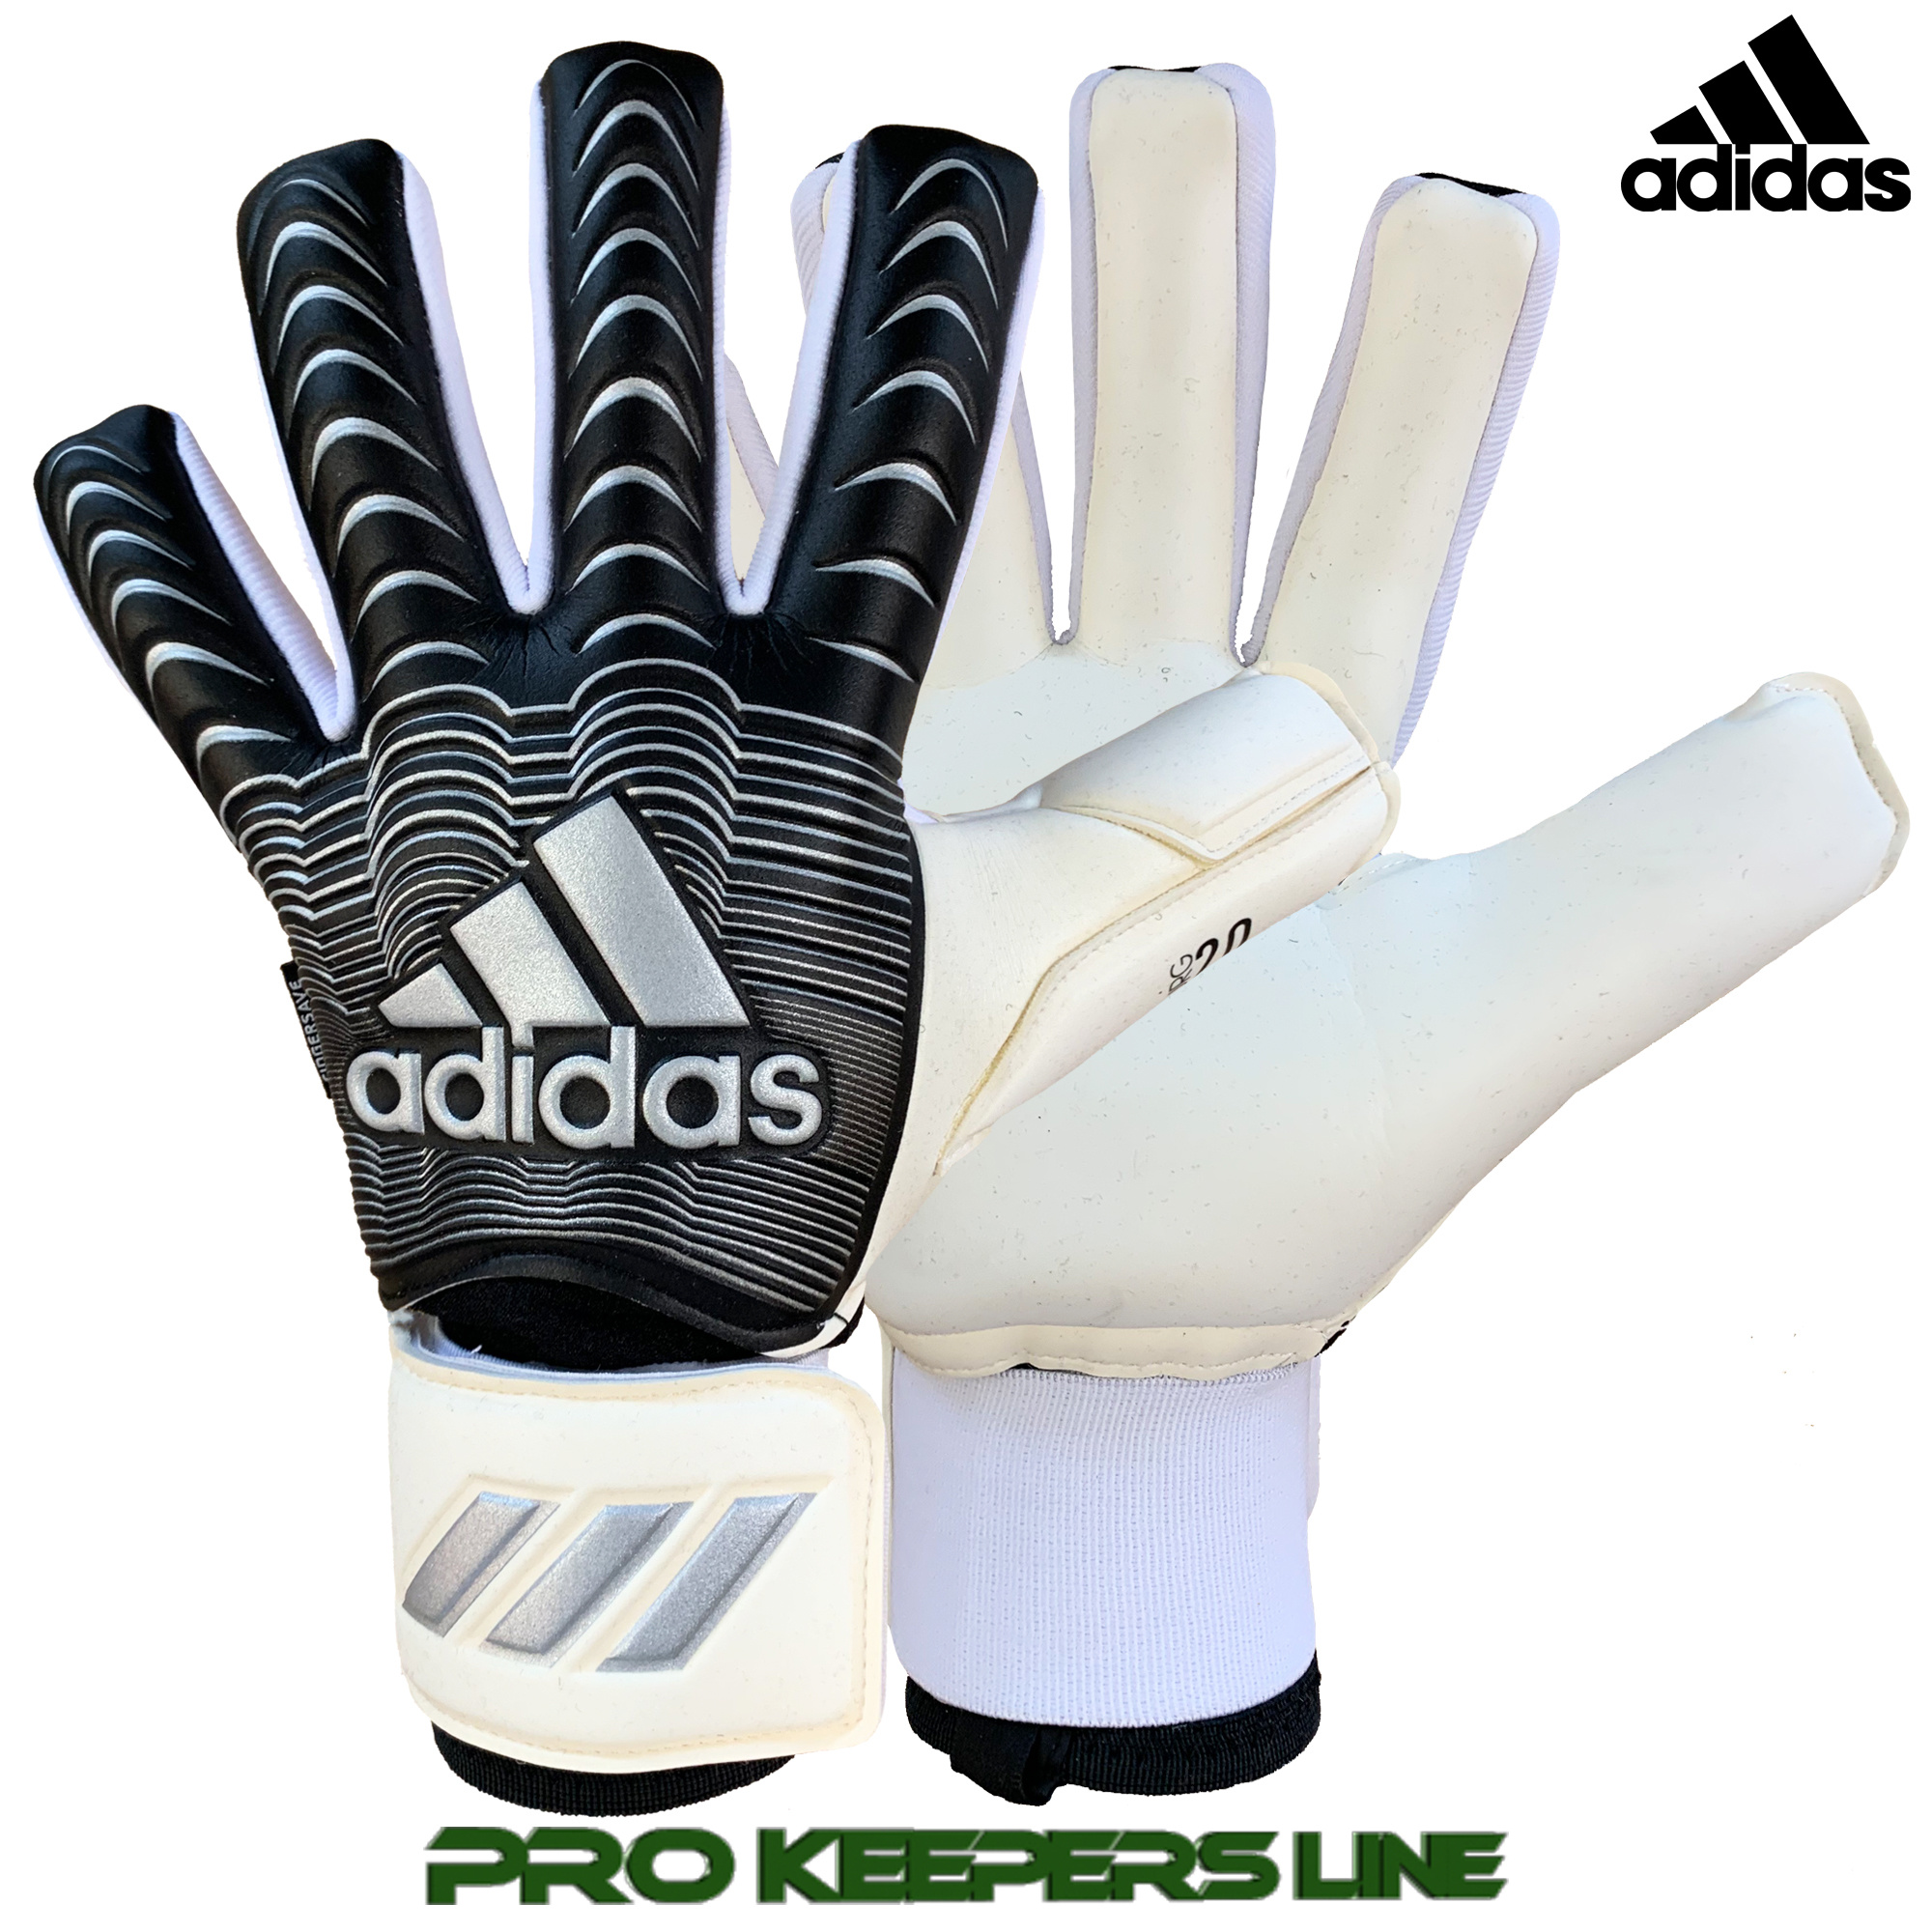 ADIDAS CLASSIC PRO FINGERSAVE WHITE/BLACK/SILVER METALLIC - Pro Keepers Line